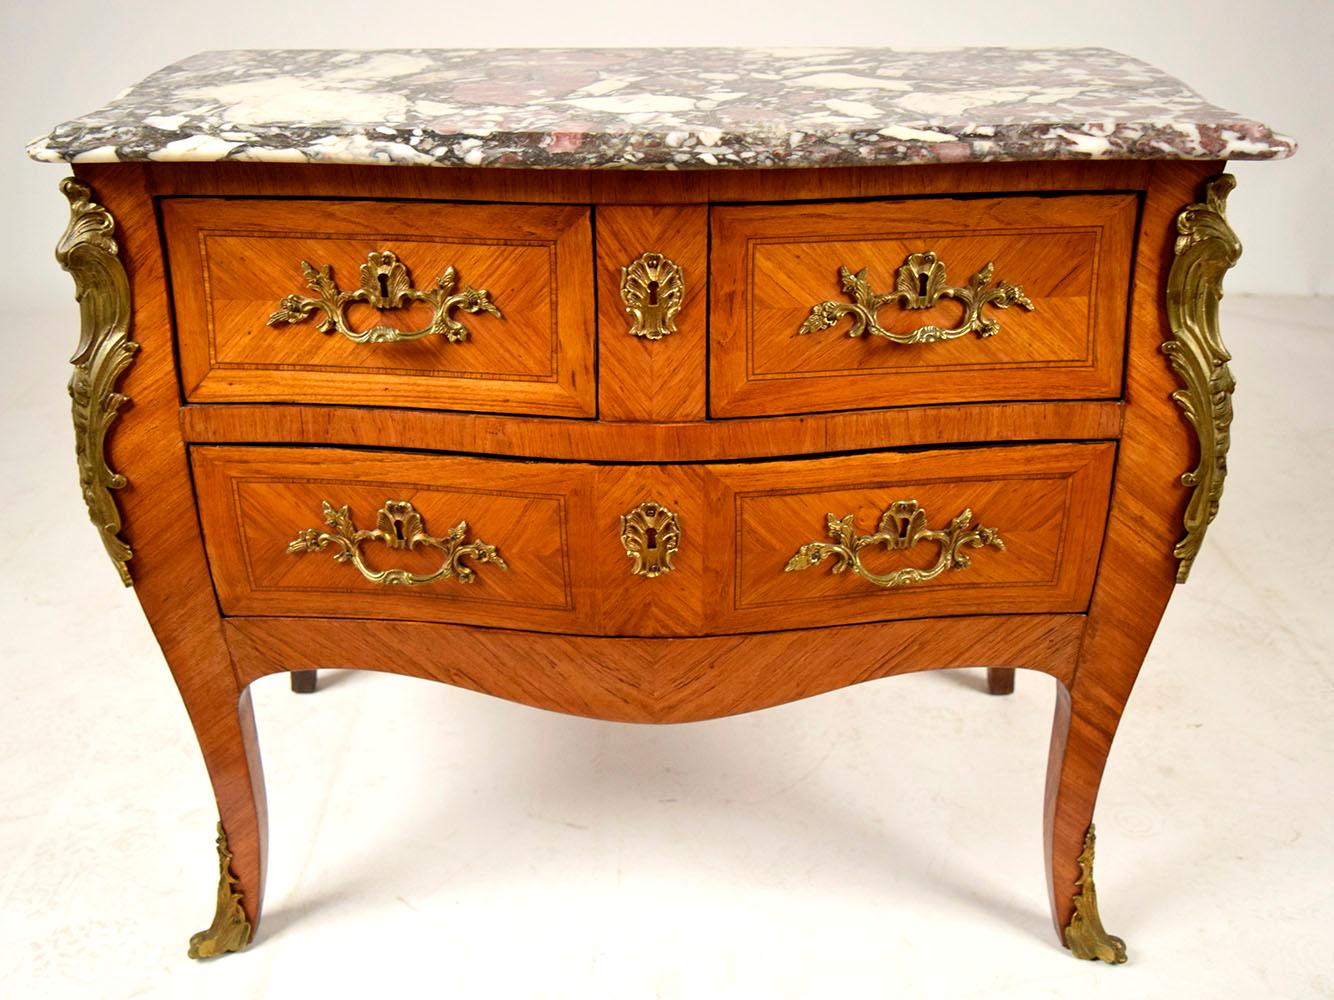 This Antique French Louis XV Style Chest of Drawers has been professionally restored, is made out of solid wood, and has an intricate inlaid design with a newly polished patina finish. The commode features a multicolored beveled marble top, two